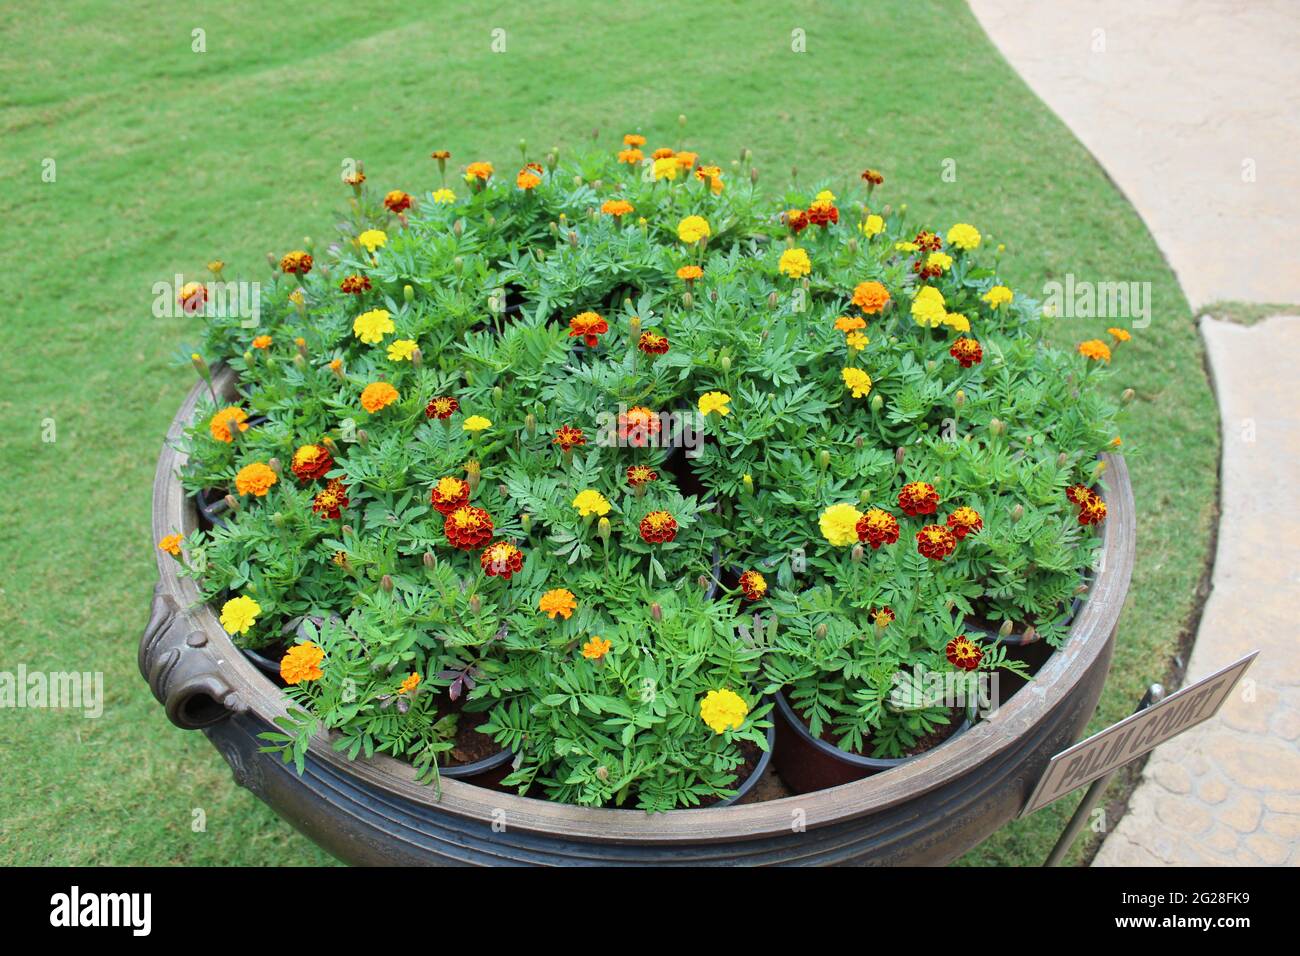 Circular Flower bed in a Large Traditional Pot:  African marigold (Compositae) Tagetes erecta L.,- Tagetes - Aztec marigold, Saffron marigold Stock Photo